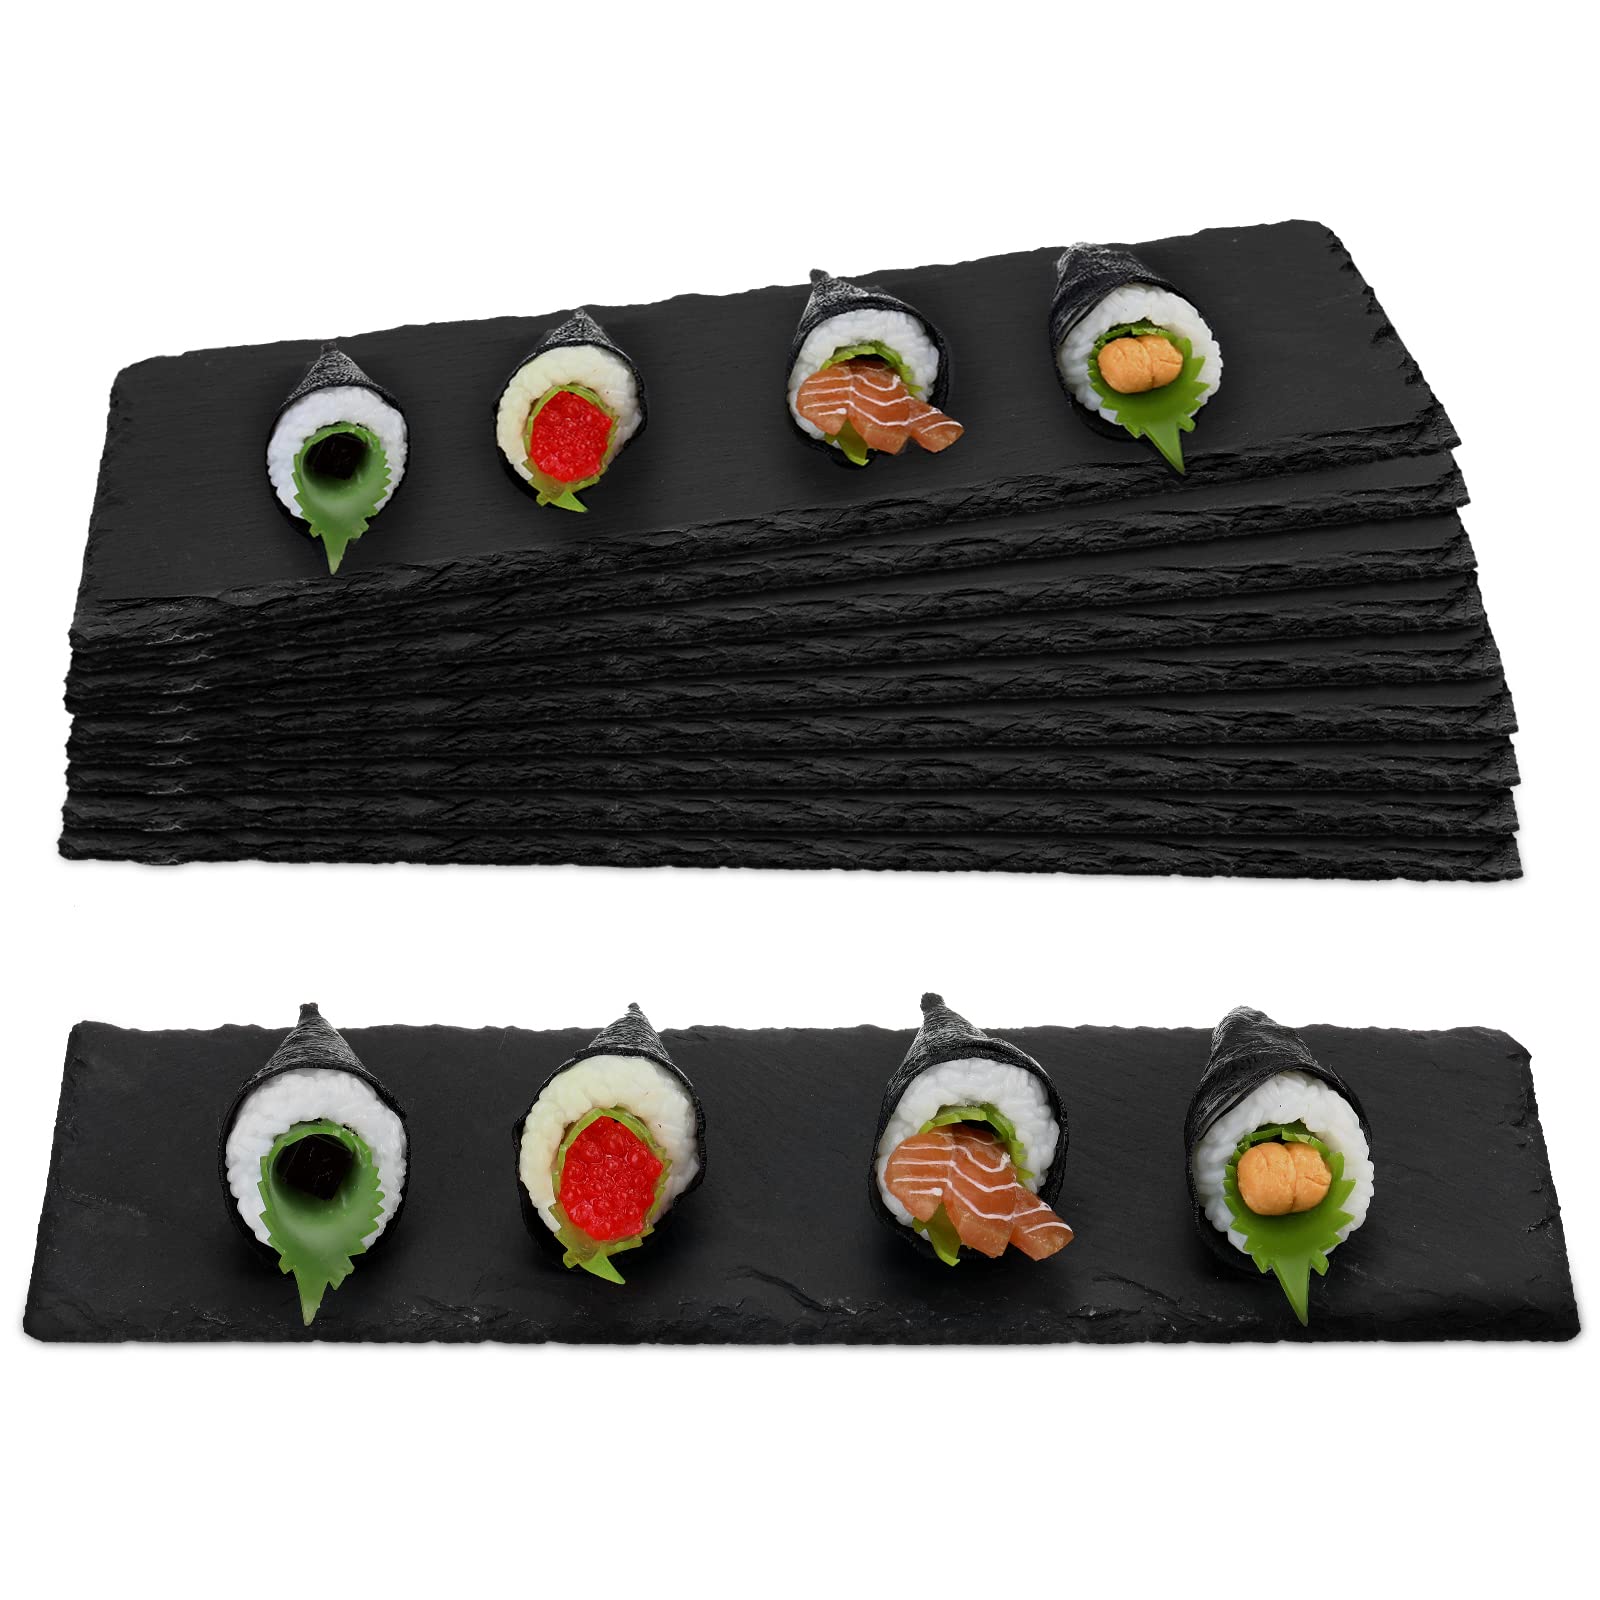 10 Pack Black Slate Charcuterie Board Black Slate Cheese Board Bulk Stone Plates with Natural Edge Slate Plates for Dried Fruit Dessert Appetizer Cake Fruit Meat Kitchen Dining Party (12 x 4 Inch)